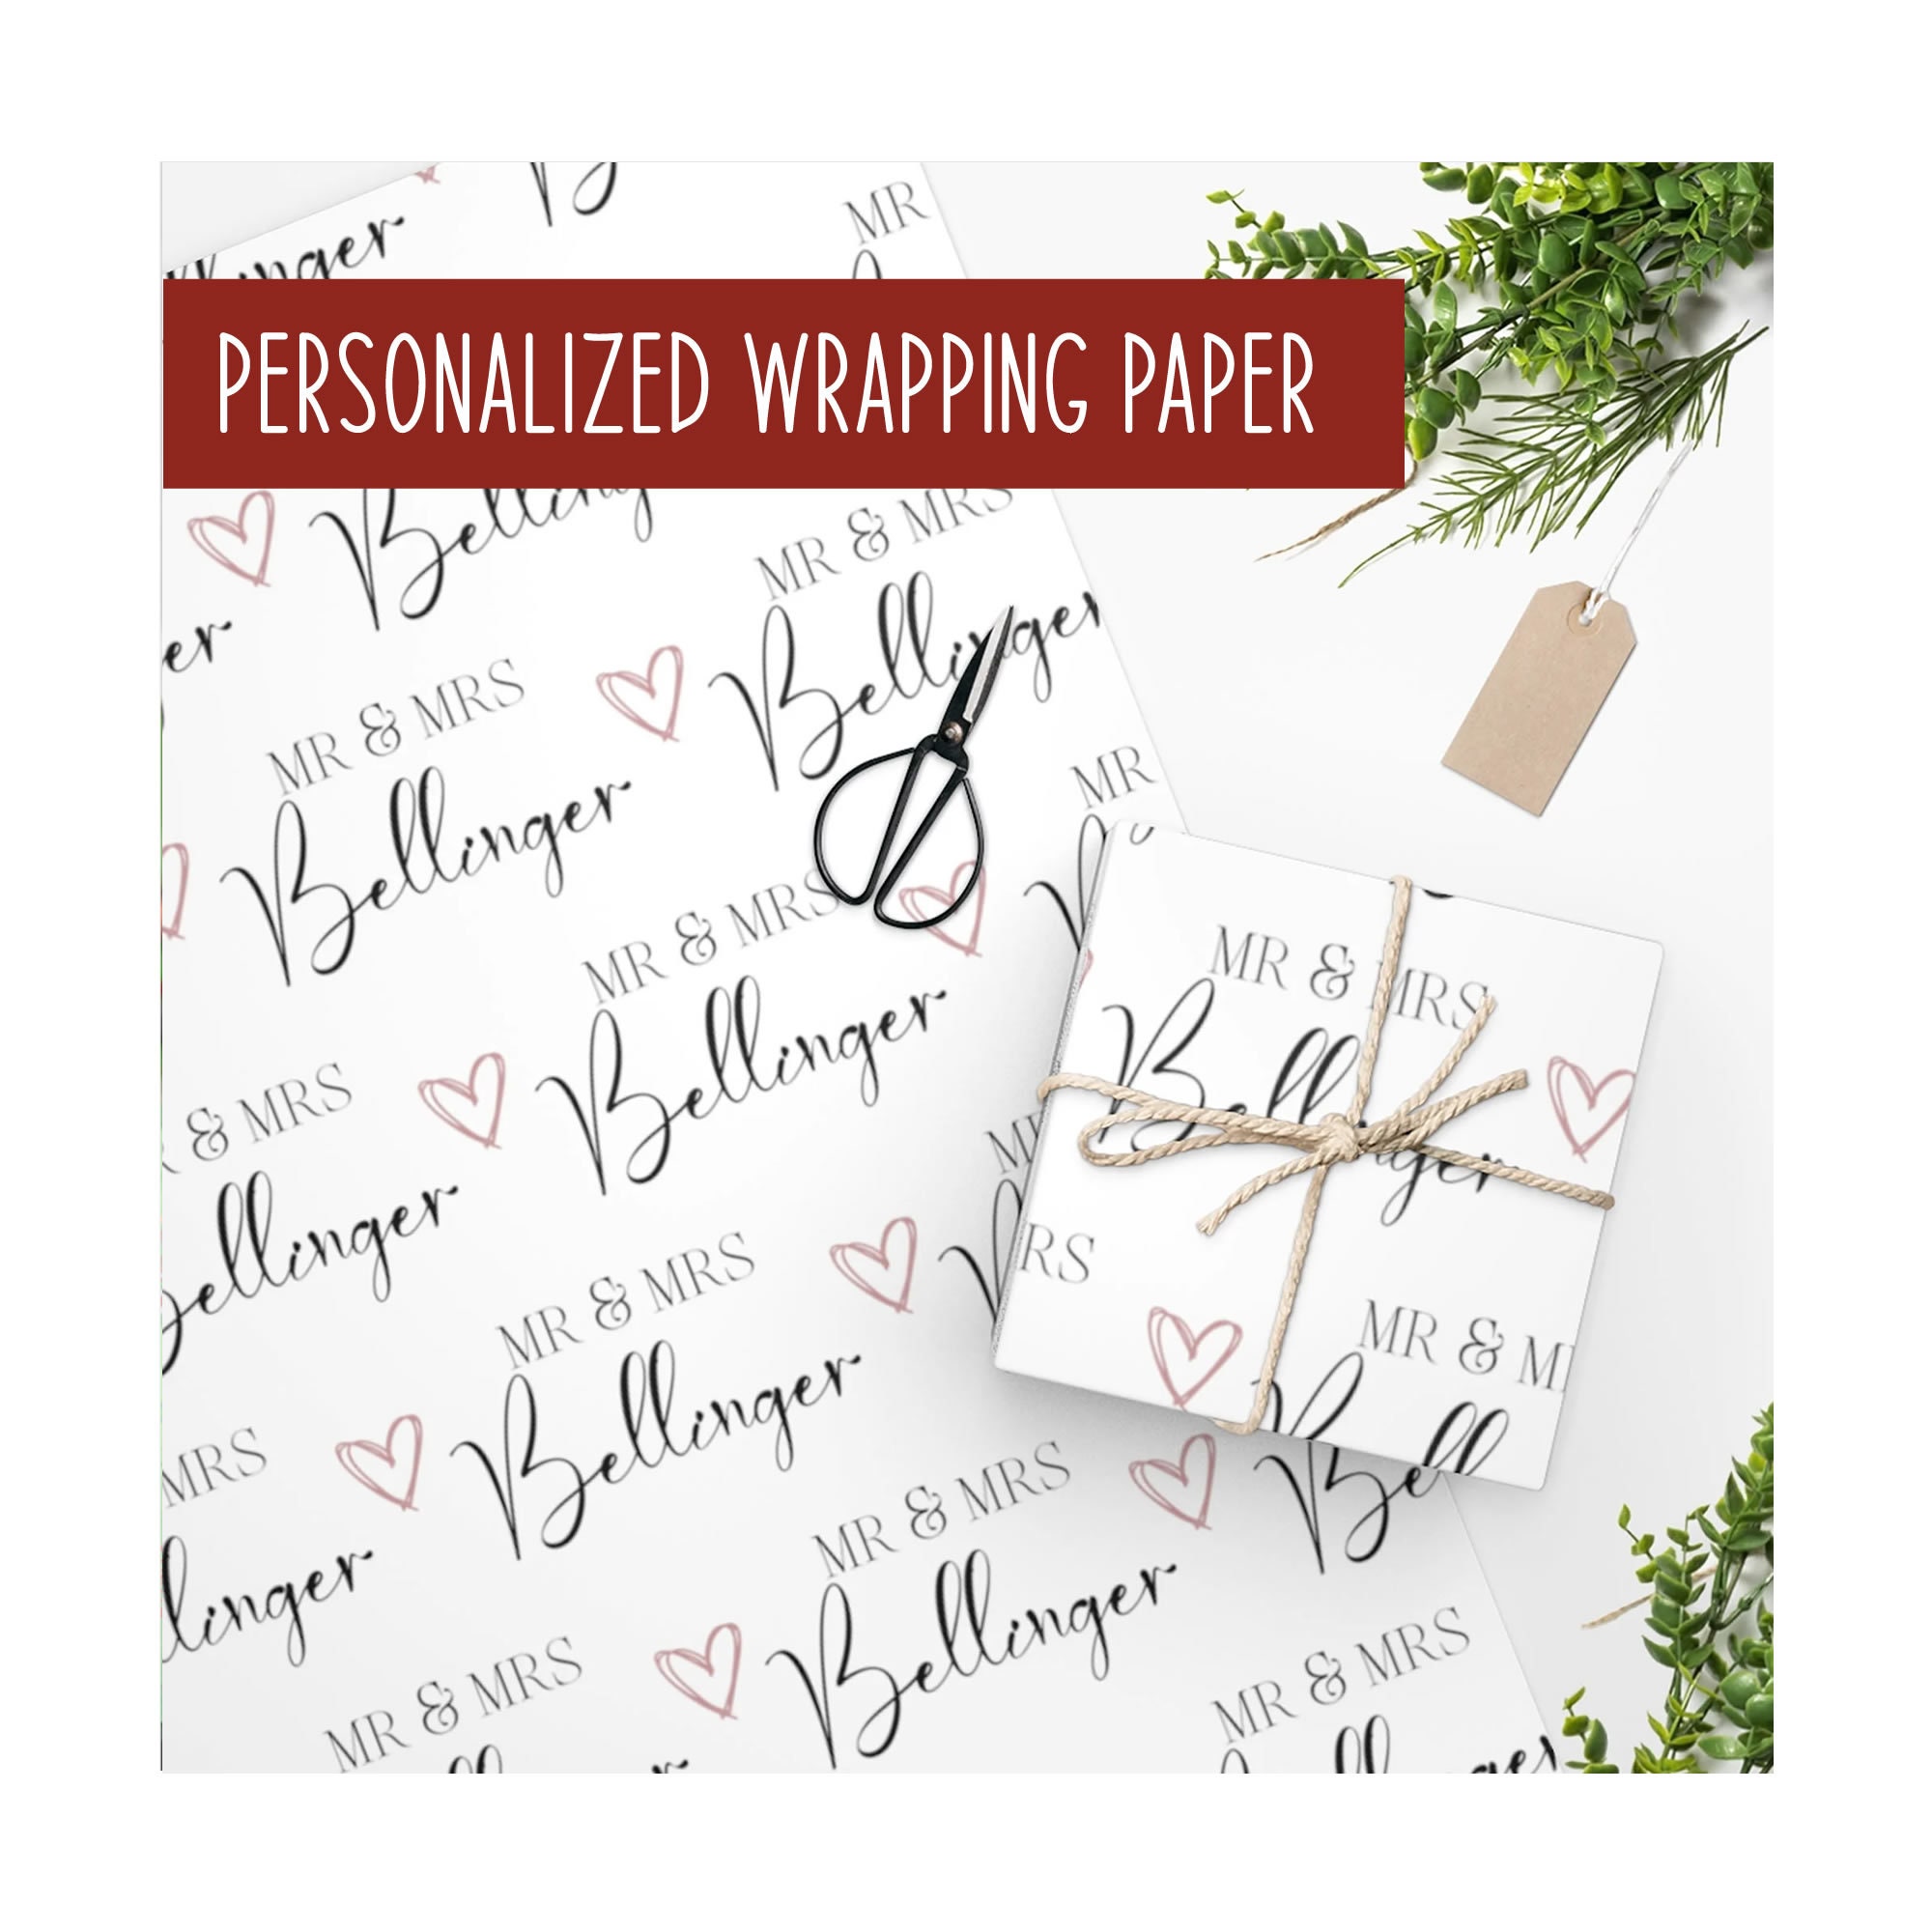 FUYUYU Bridal Shower Wrapping Paper 1PC DIY Children's Christmas